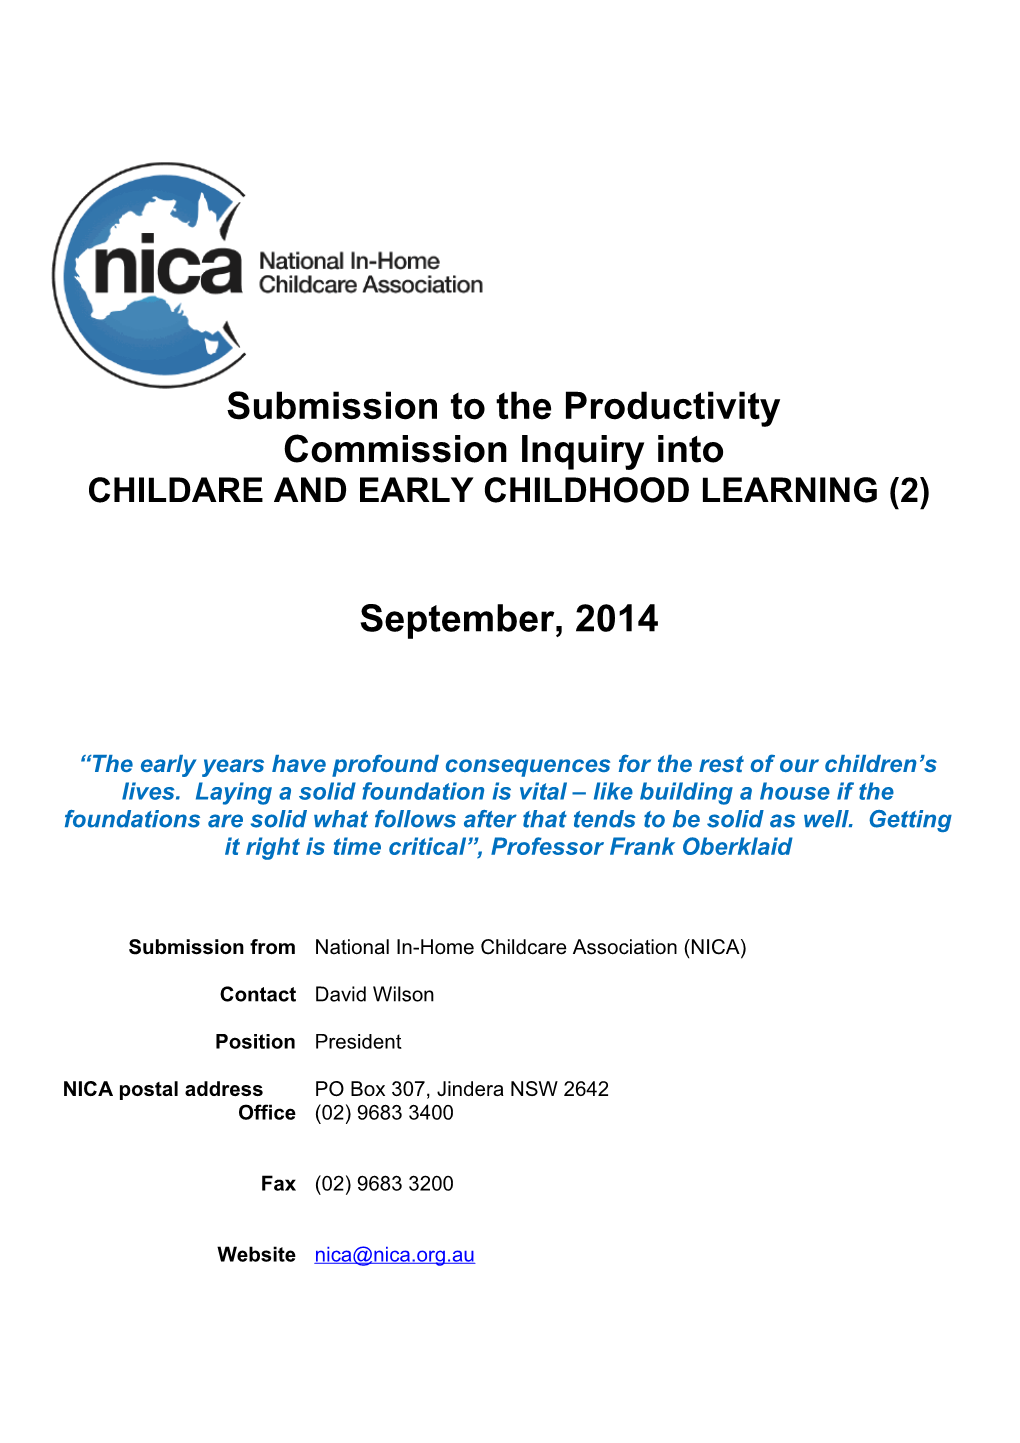 Submission DR600 - National in Home Child Care Association - Childcare and Early Childhood